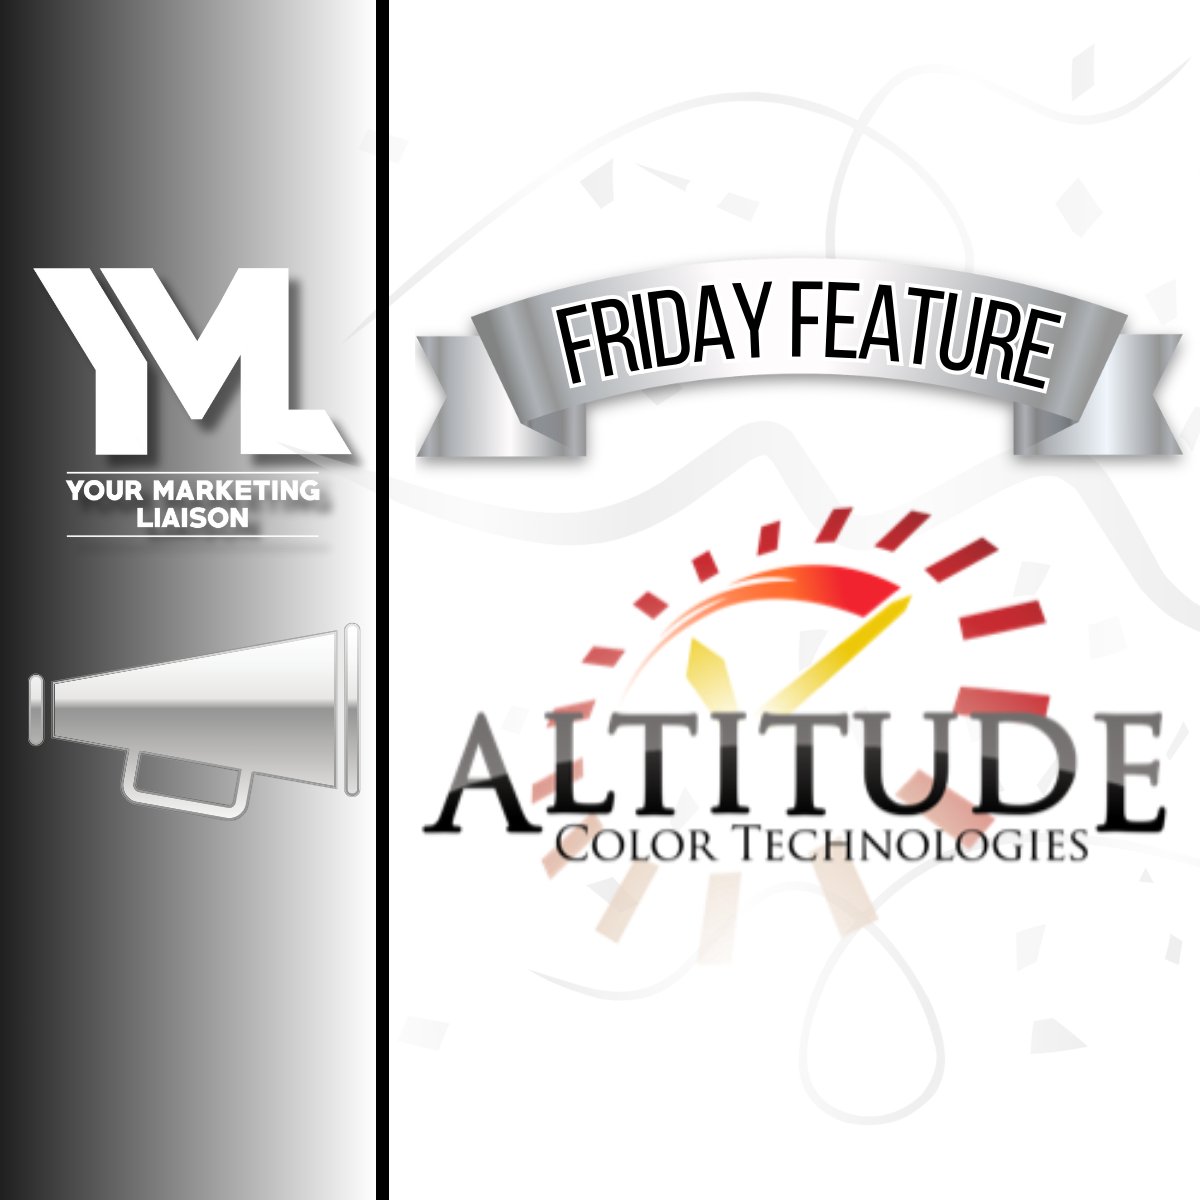 #FridayFeature – Did you know that our client, @altitudecolor built their business on a philosophy of team work and partnership? Their team is dedicated to exceeding the expectations of their various clients.

Visit their website altitudecolor.com to learn more!